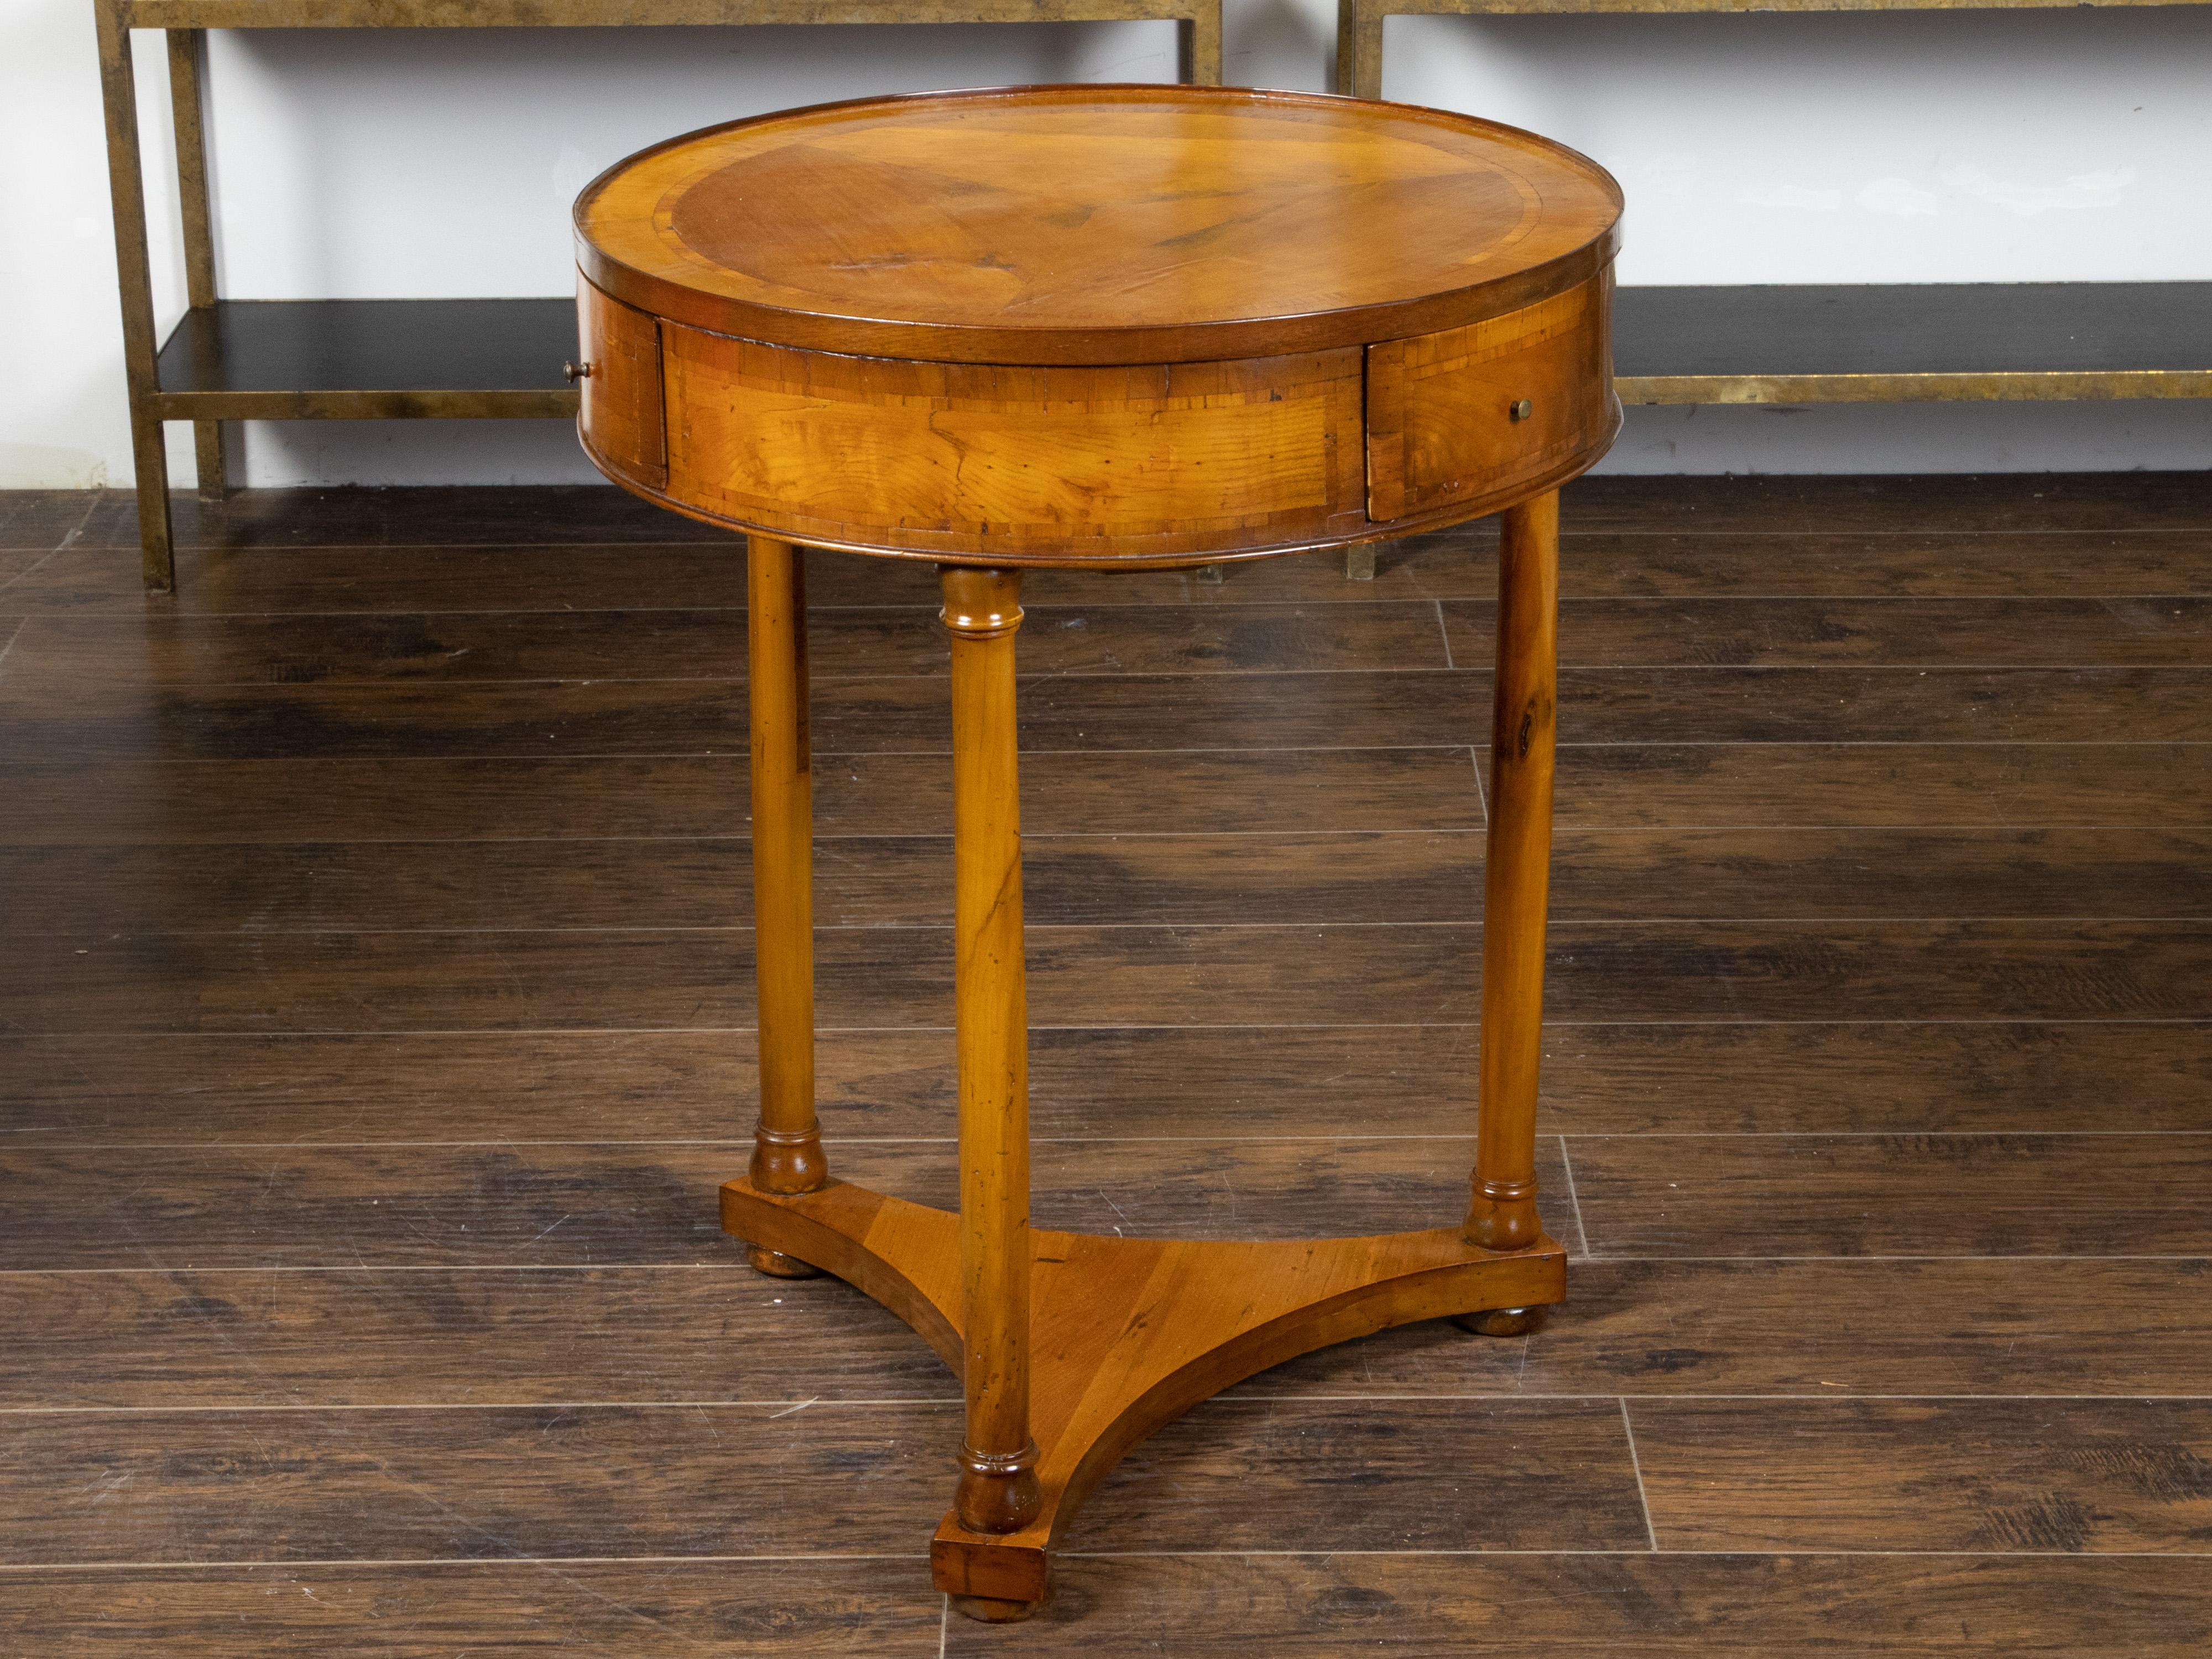 Veneer Biedermeier Period 1840s Table with Round Top, Three Drawers and Column Legs For Sale